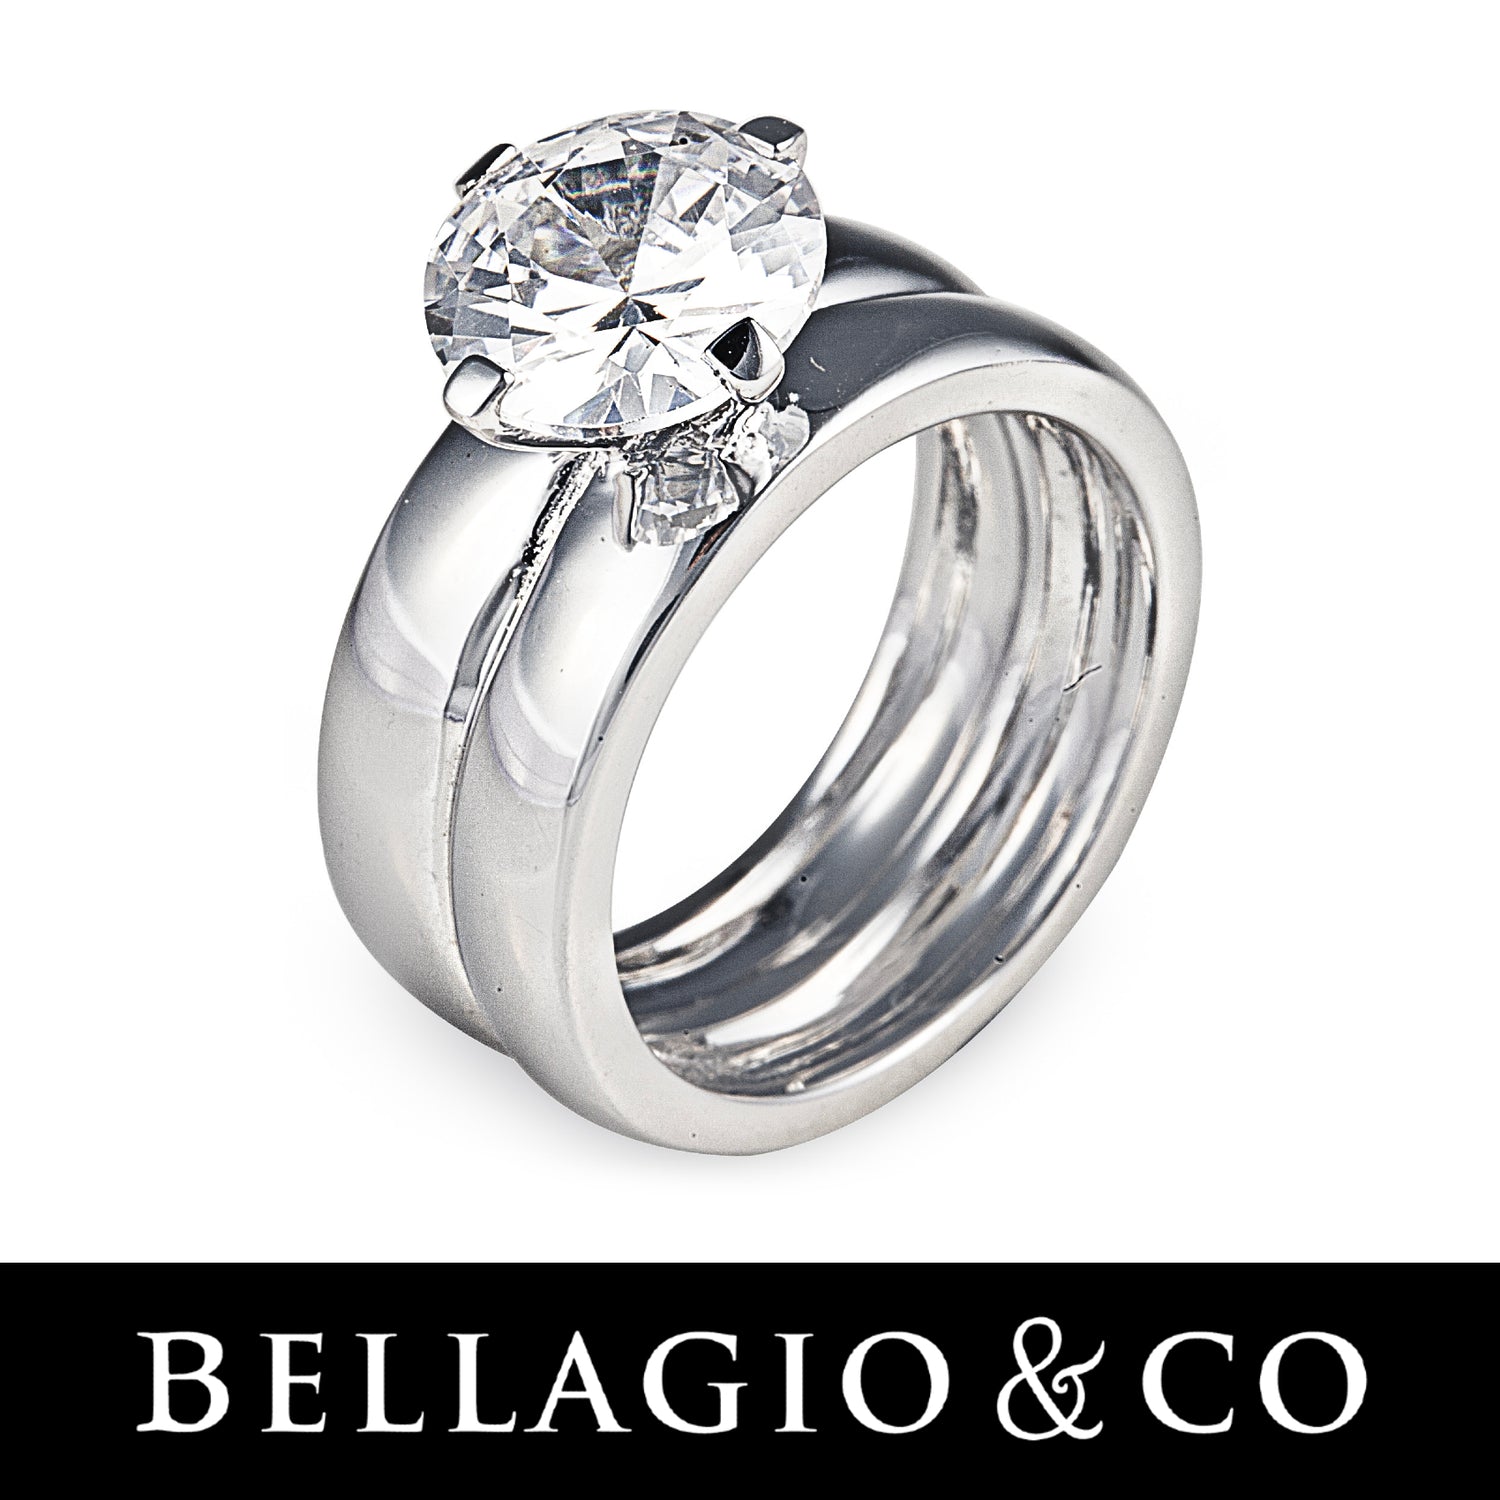 Shop our bridal collection  Worldwide shipping plus FREE express shipping on orders over $150 within Australia. Affordable luxury jewellery by Bellagio & Co.